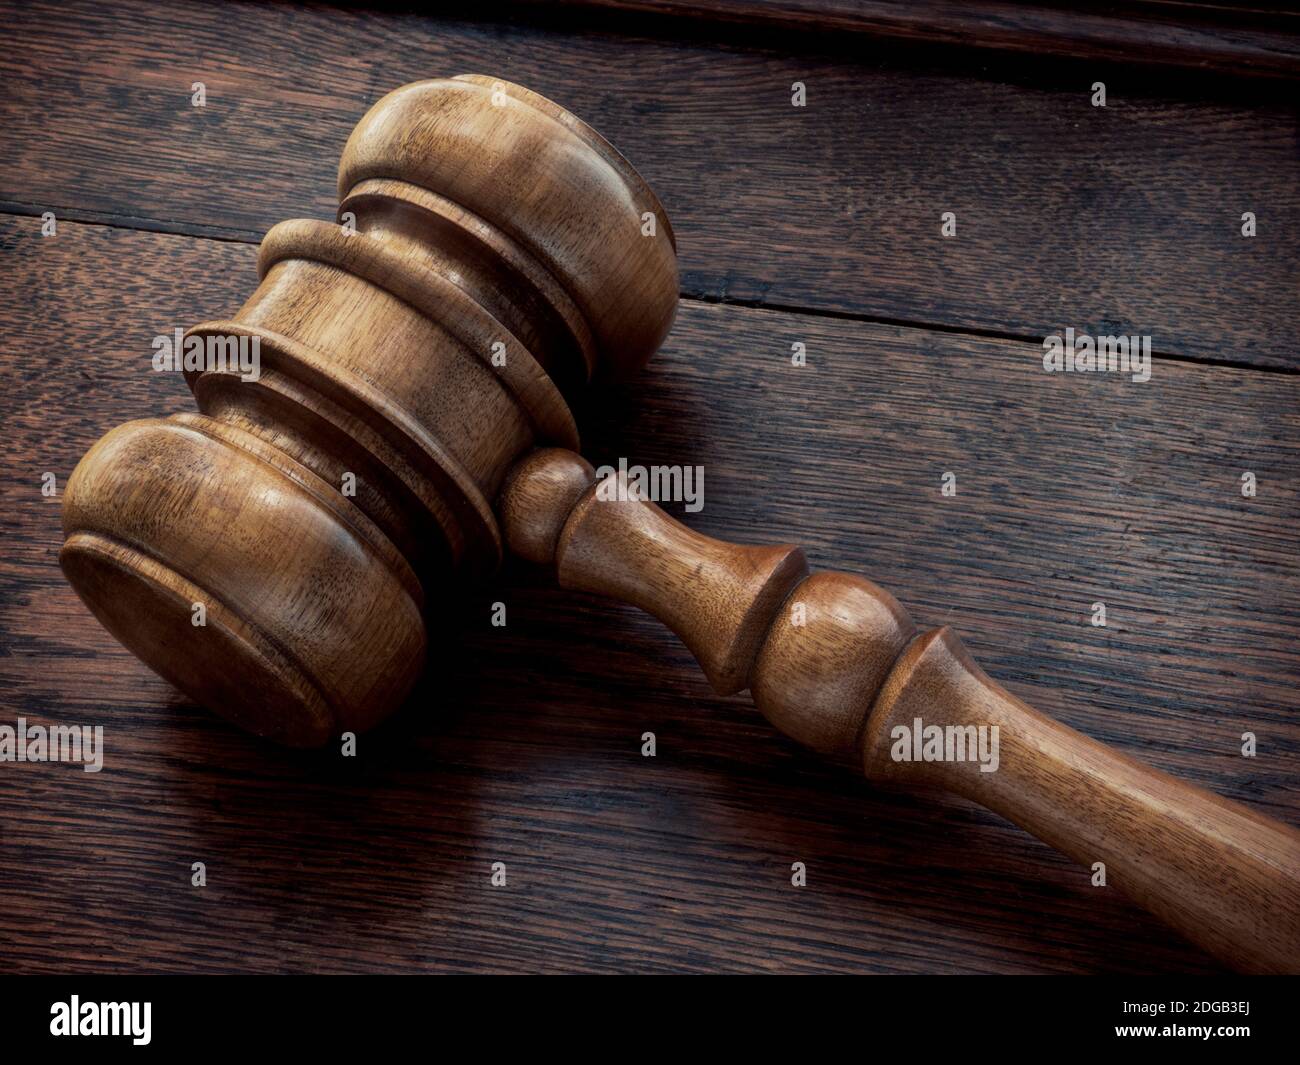 Gavel Hammer in Law Courts at Judges bench recess sentence. Justice Legal Judgement Auction Sale podium Stock Photo